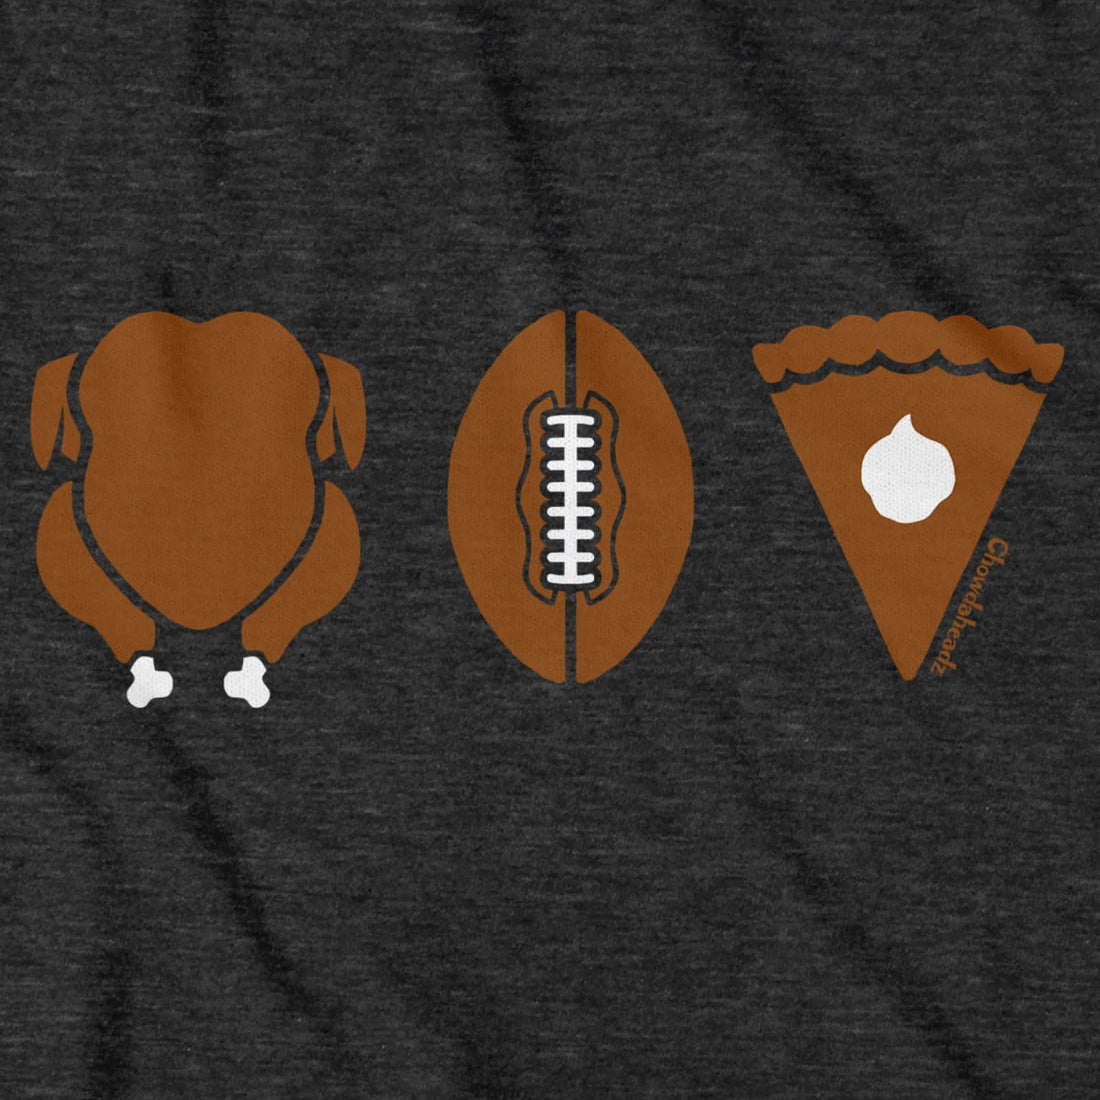 In New England We Love Thanksgiving.  The Three F's - Food, Family, Football!